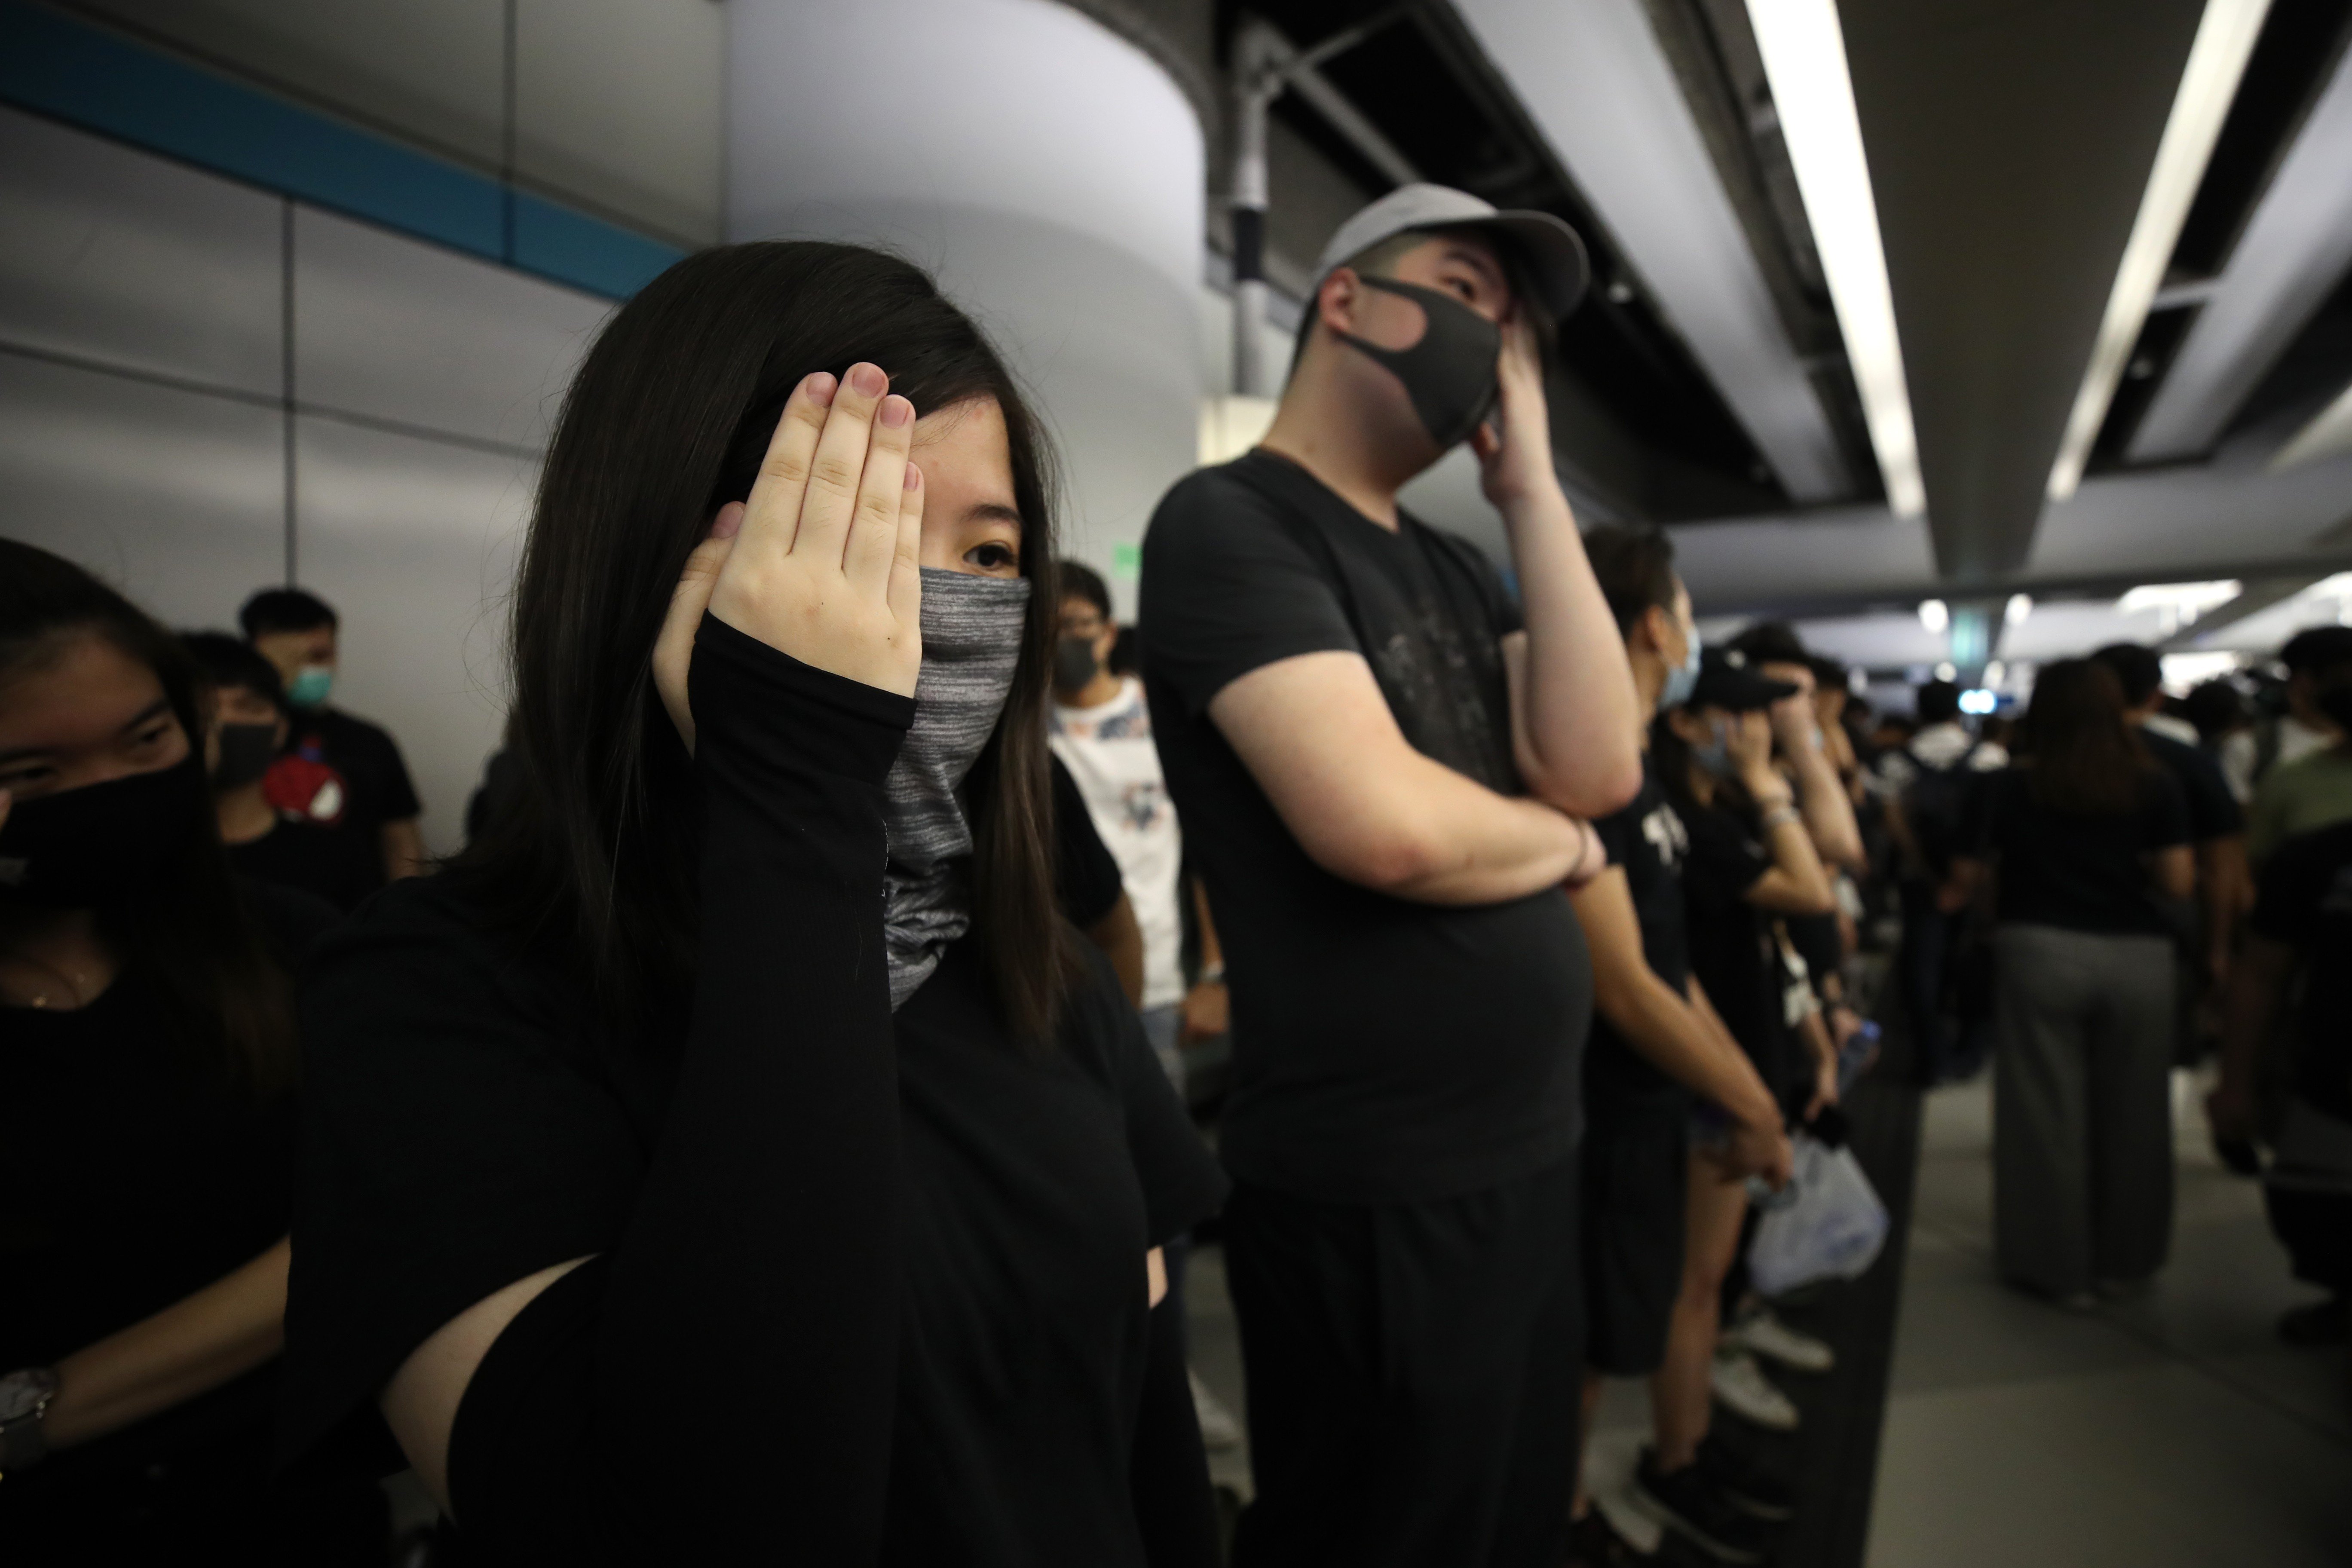 Protesters stage a sit-in on August 21 wearing their trademark all-black outfits. Photo: Winson Wong